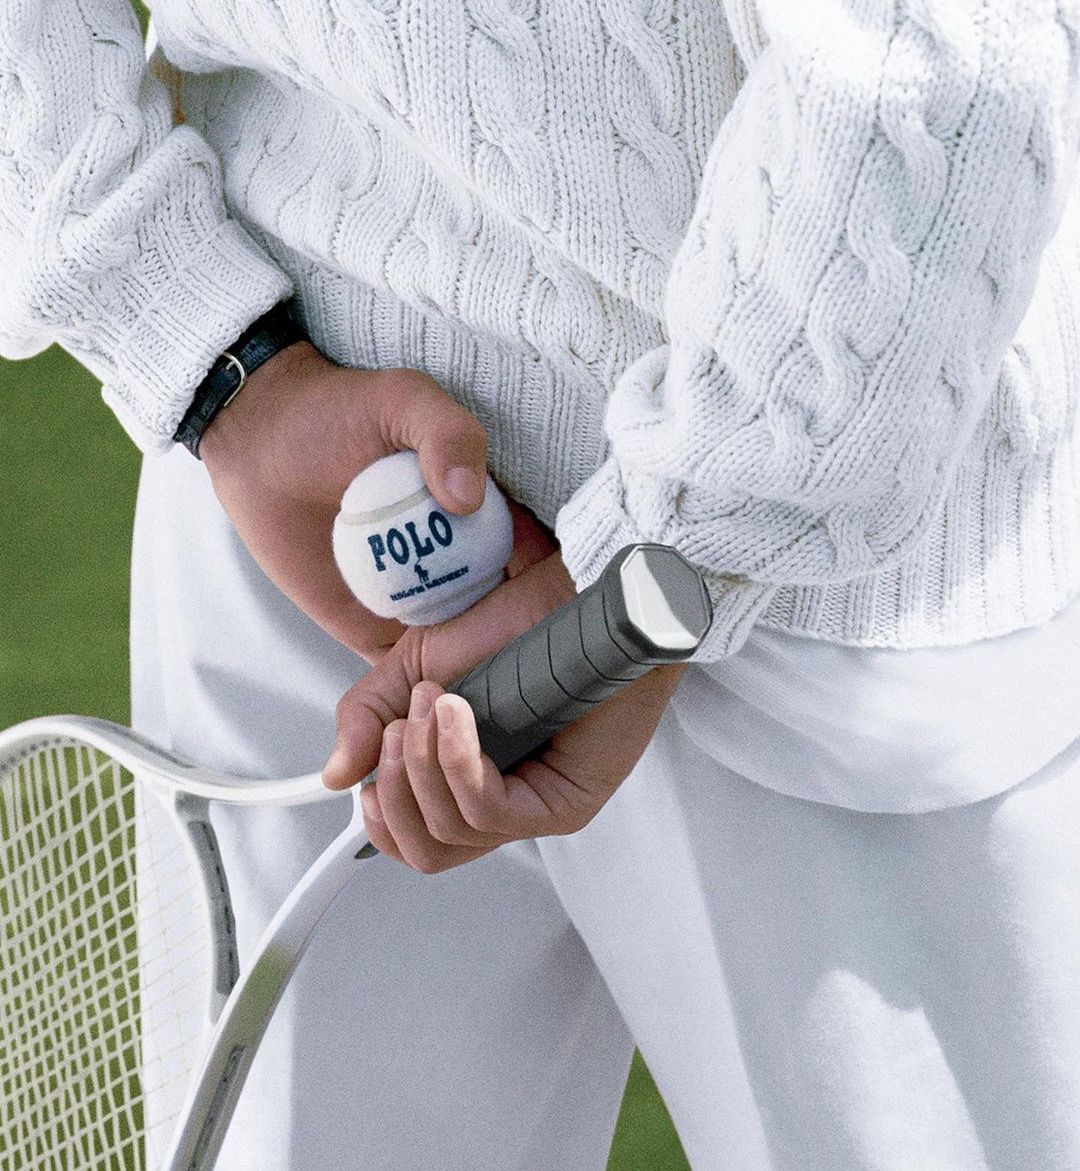 What to Wear on the Tennis Court